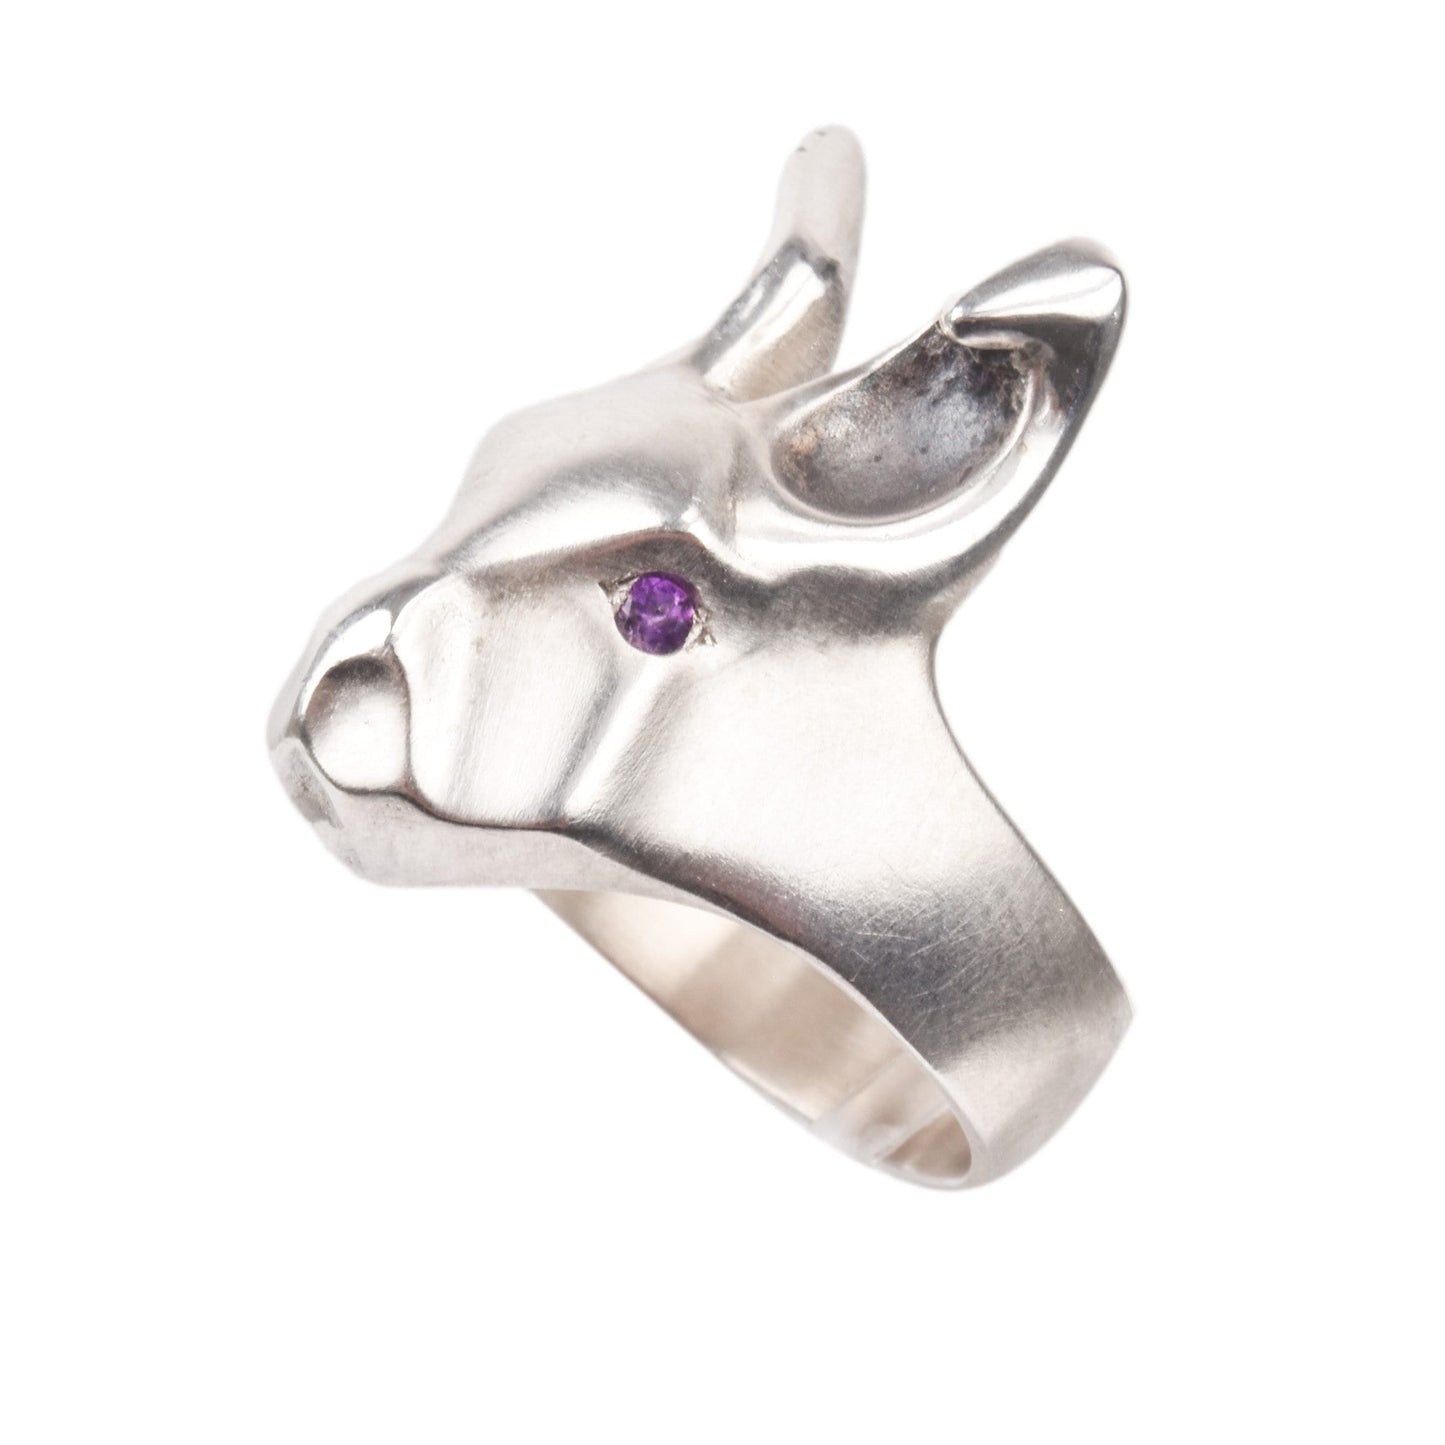 White Rabbit Ring With Amethyst Eyes, Modernist Sterling Silver Ring, Animal Jewelry, 7 1/2 US